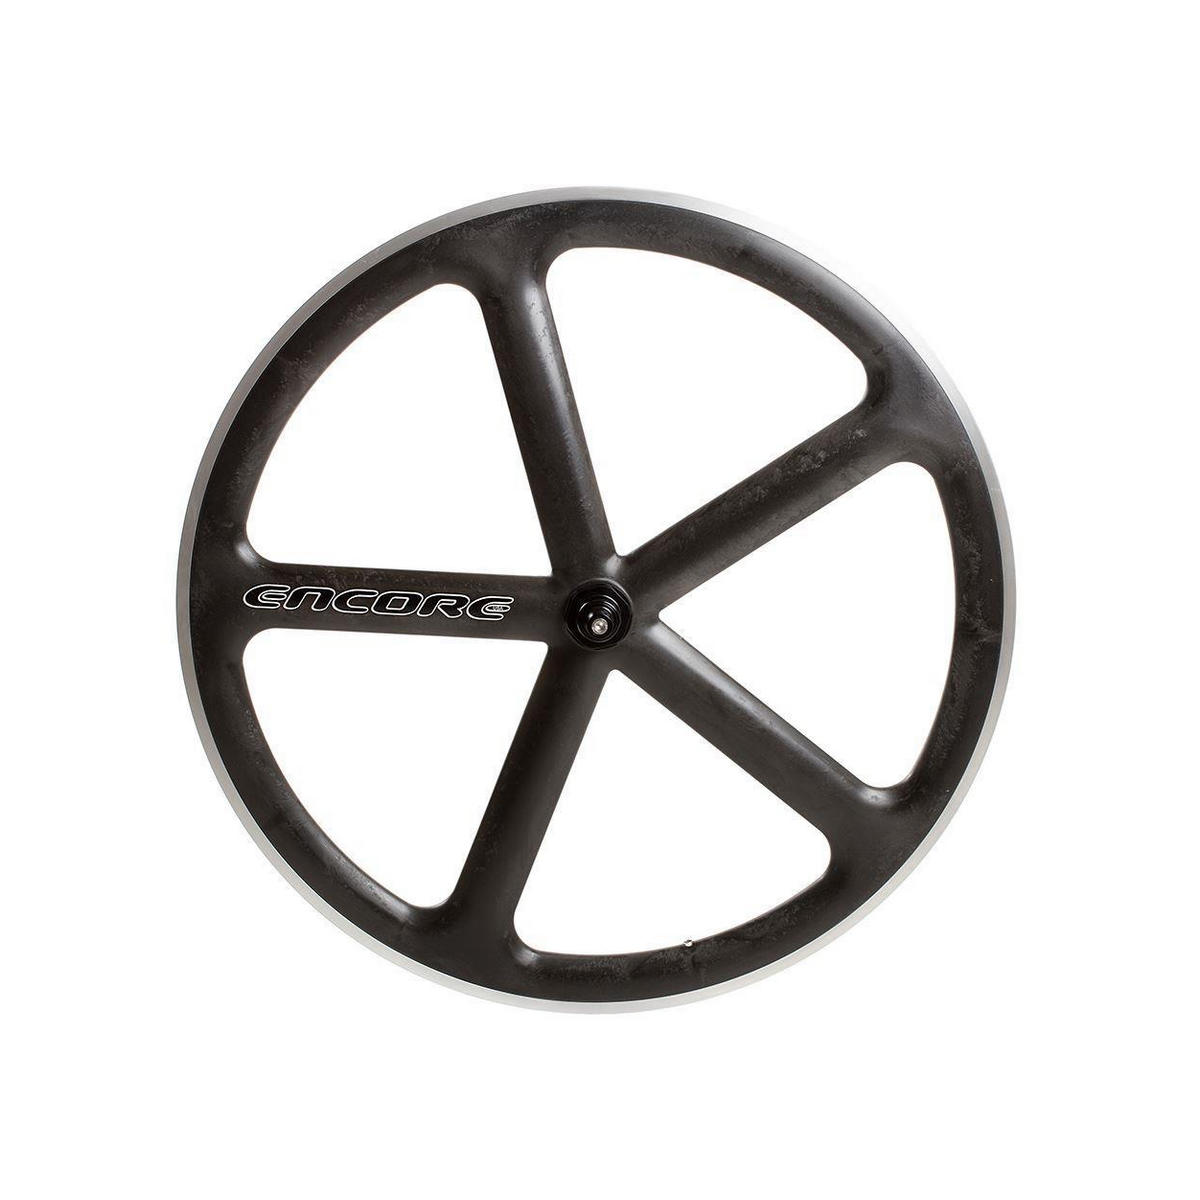 rear wheel 700c track 5 spokes carbon weave natural msw